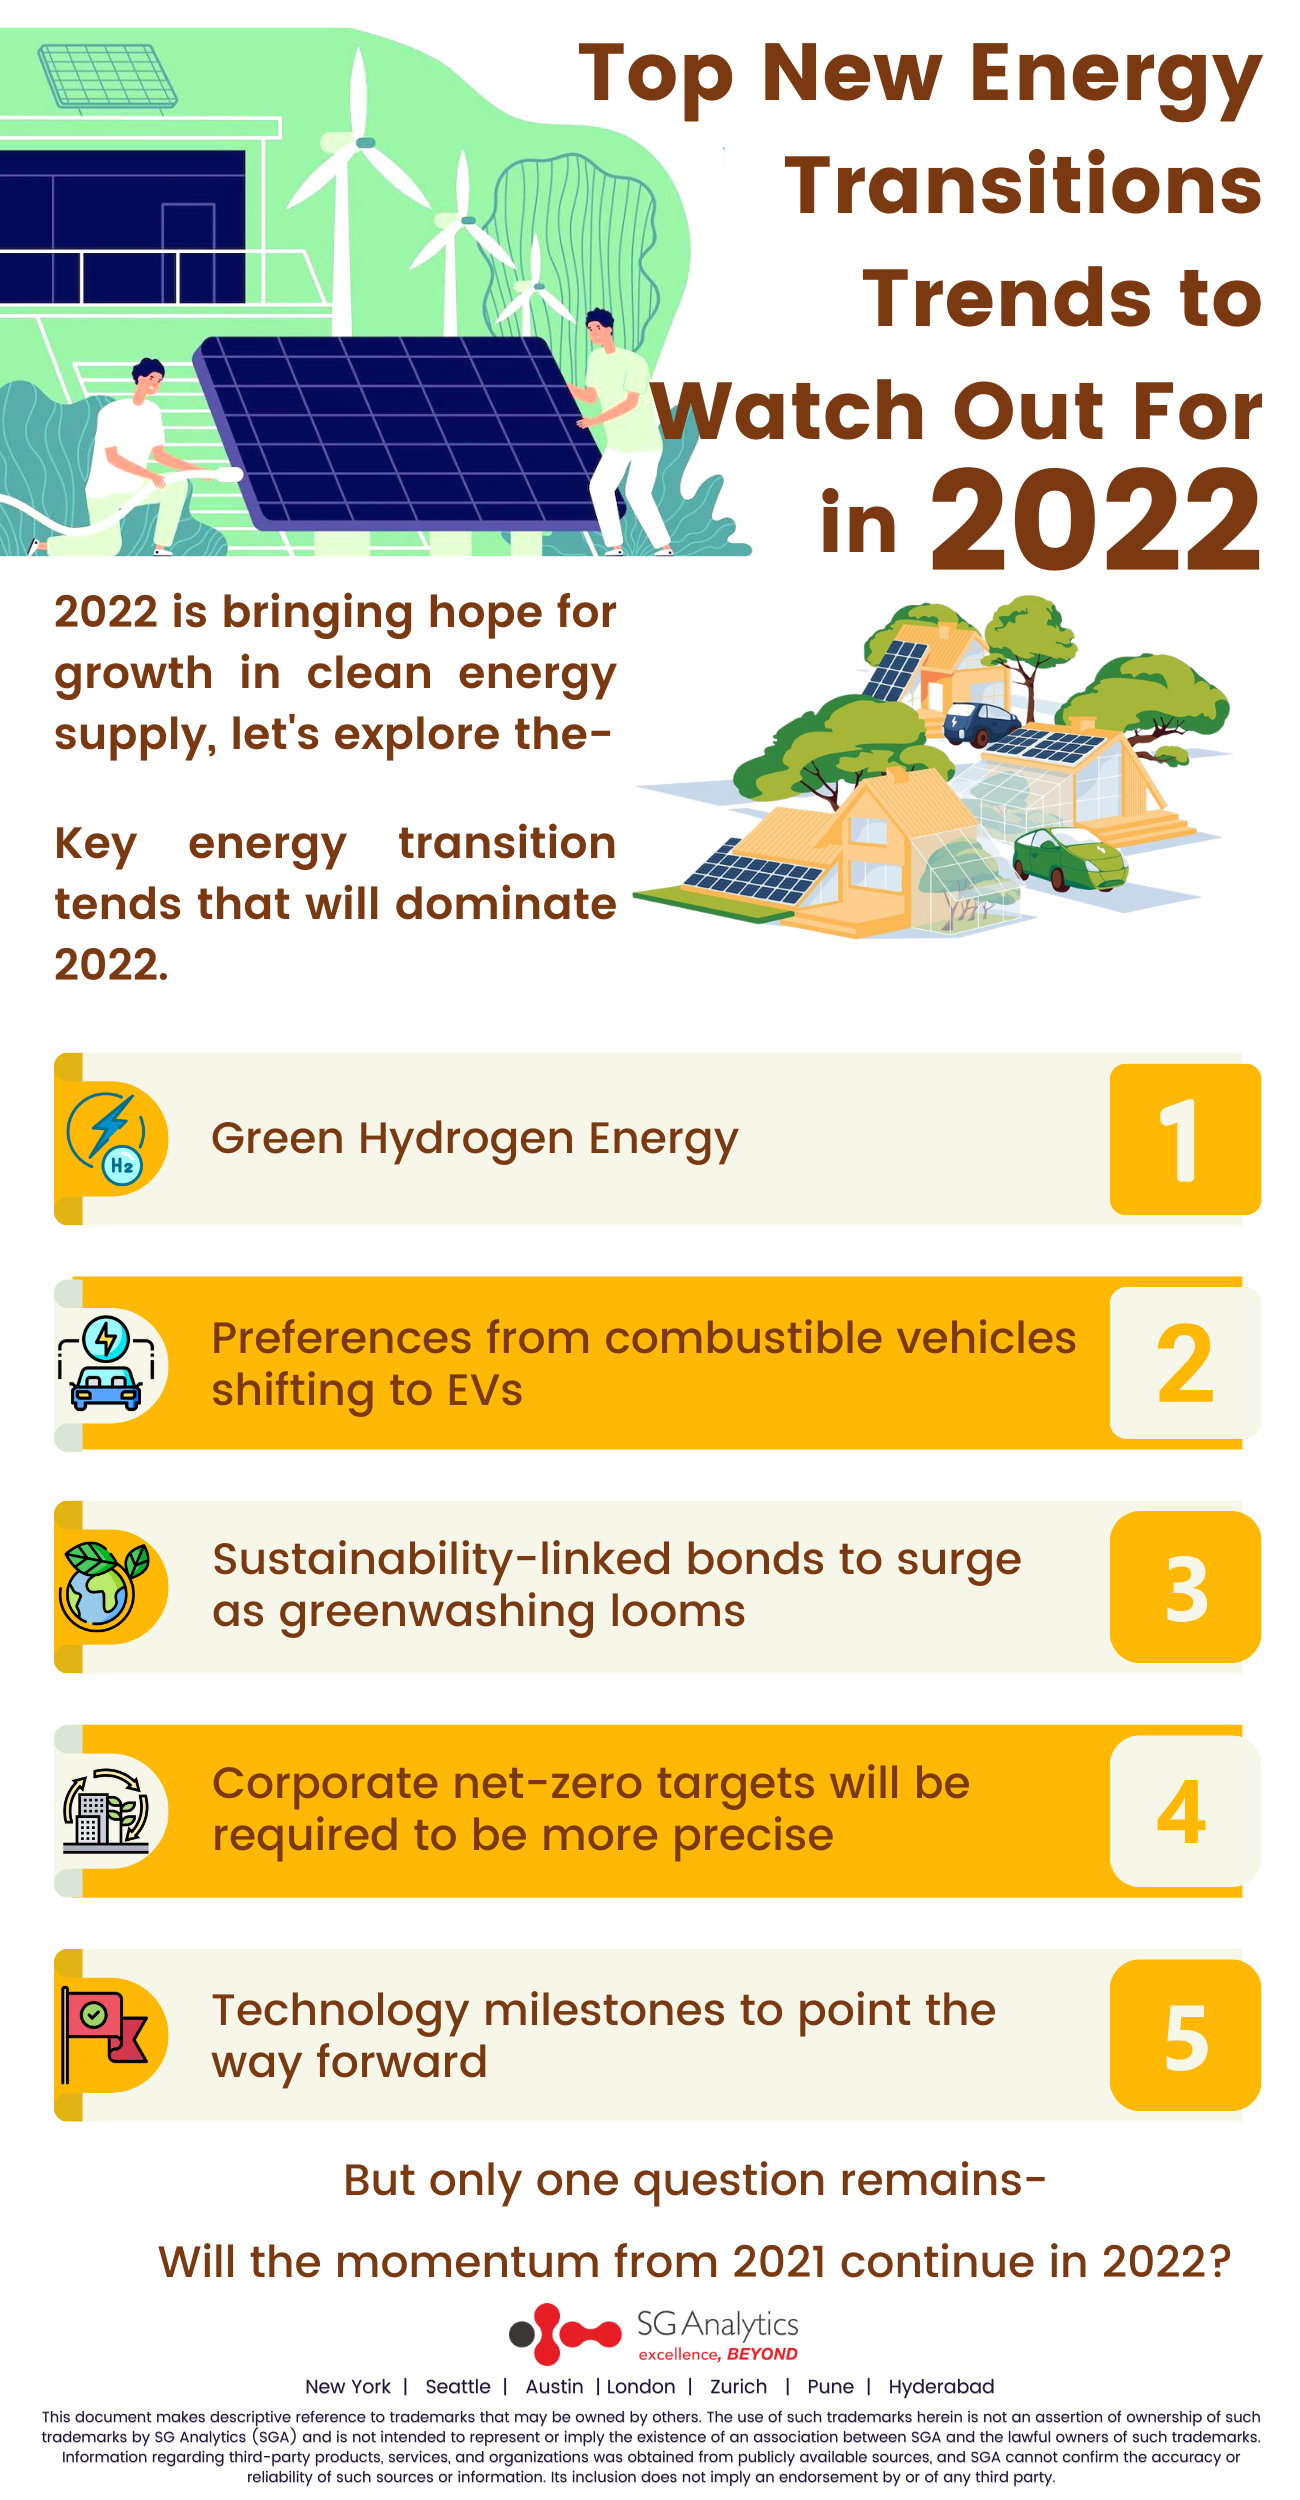 Top New Energy Transitions Trends to Watch Out for in 2022